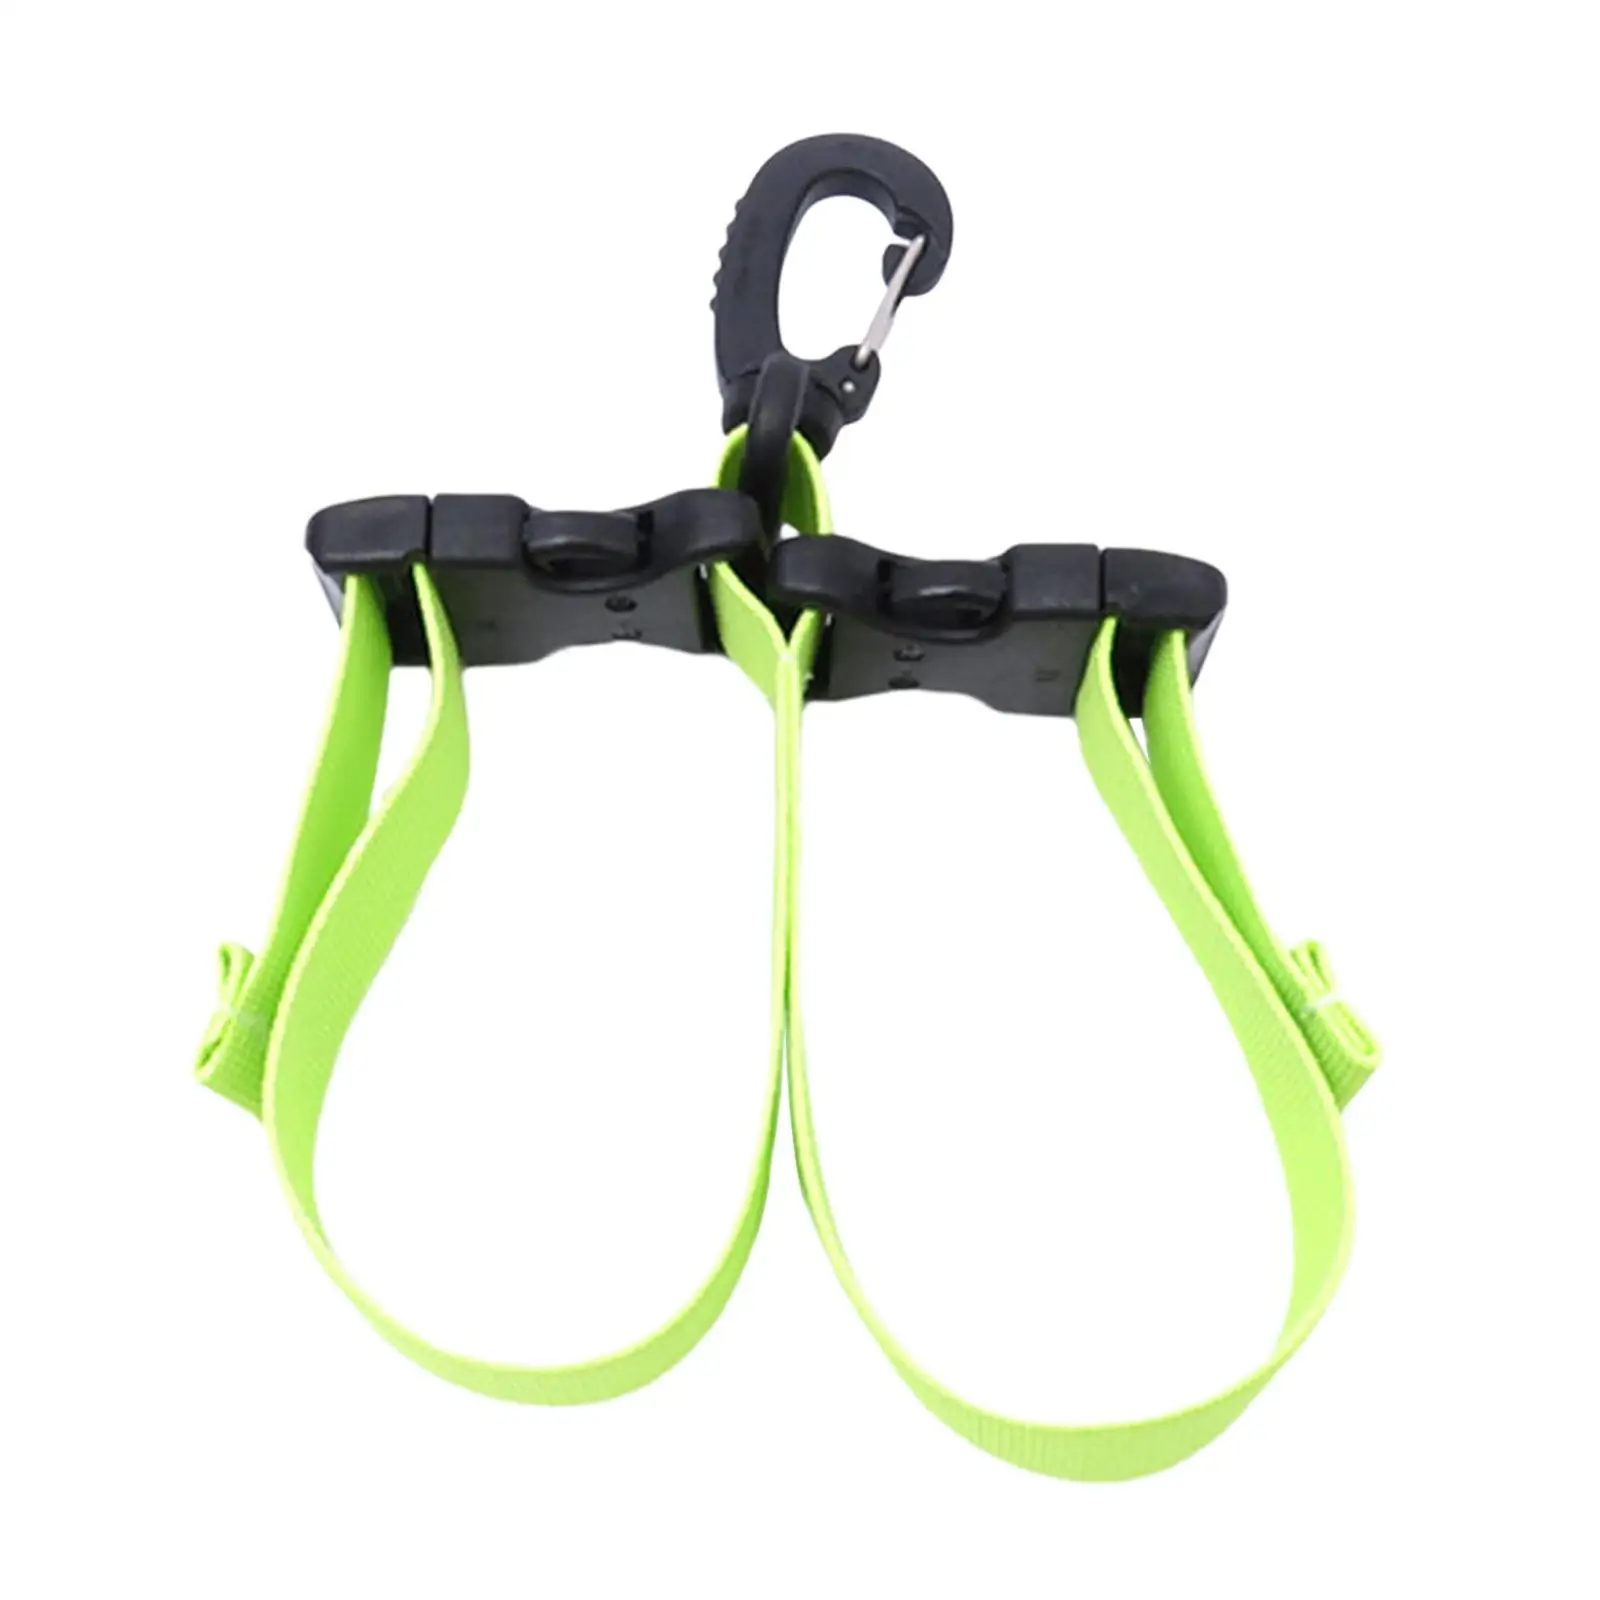 Diving Fins Strap Adjustable Swimming Fin Holder Strap Replacement Hanging Buckles Equipment Accessories for Swimming Men Women